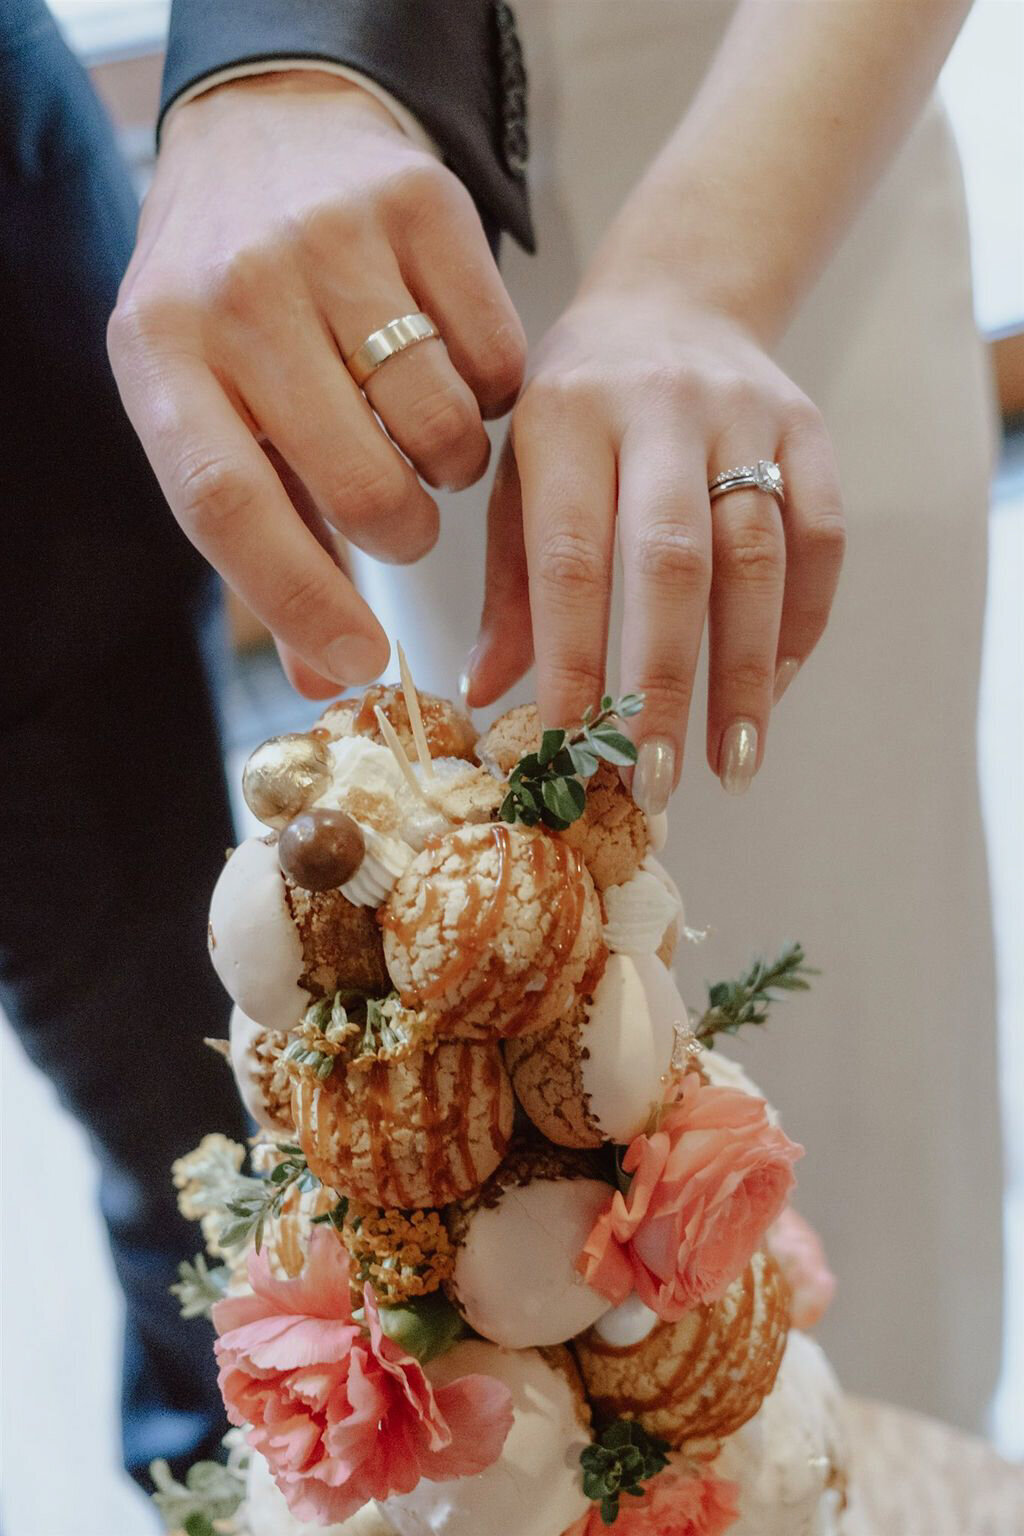 Innovative cream puff tree, created by Crème Cream Puffs, playful and modern cakes & desserts in Calgary, Alberta, featured on the Brontë Bride Vendor Guide.